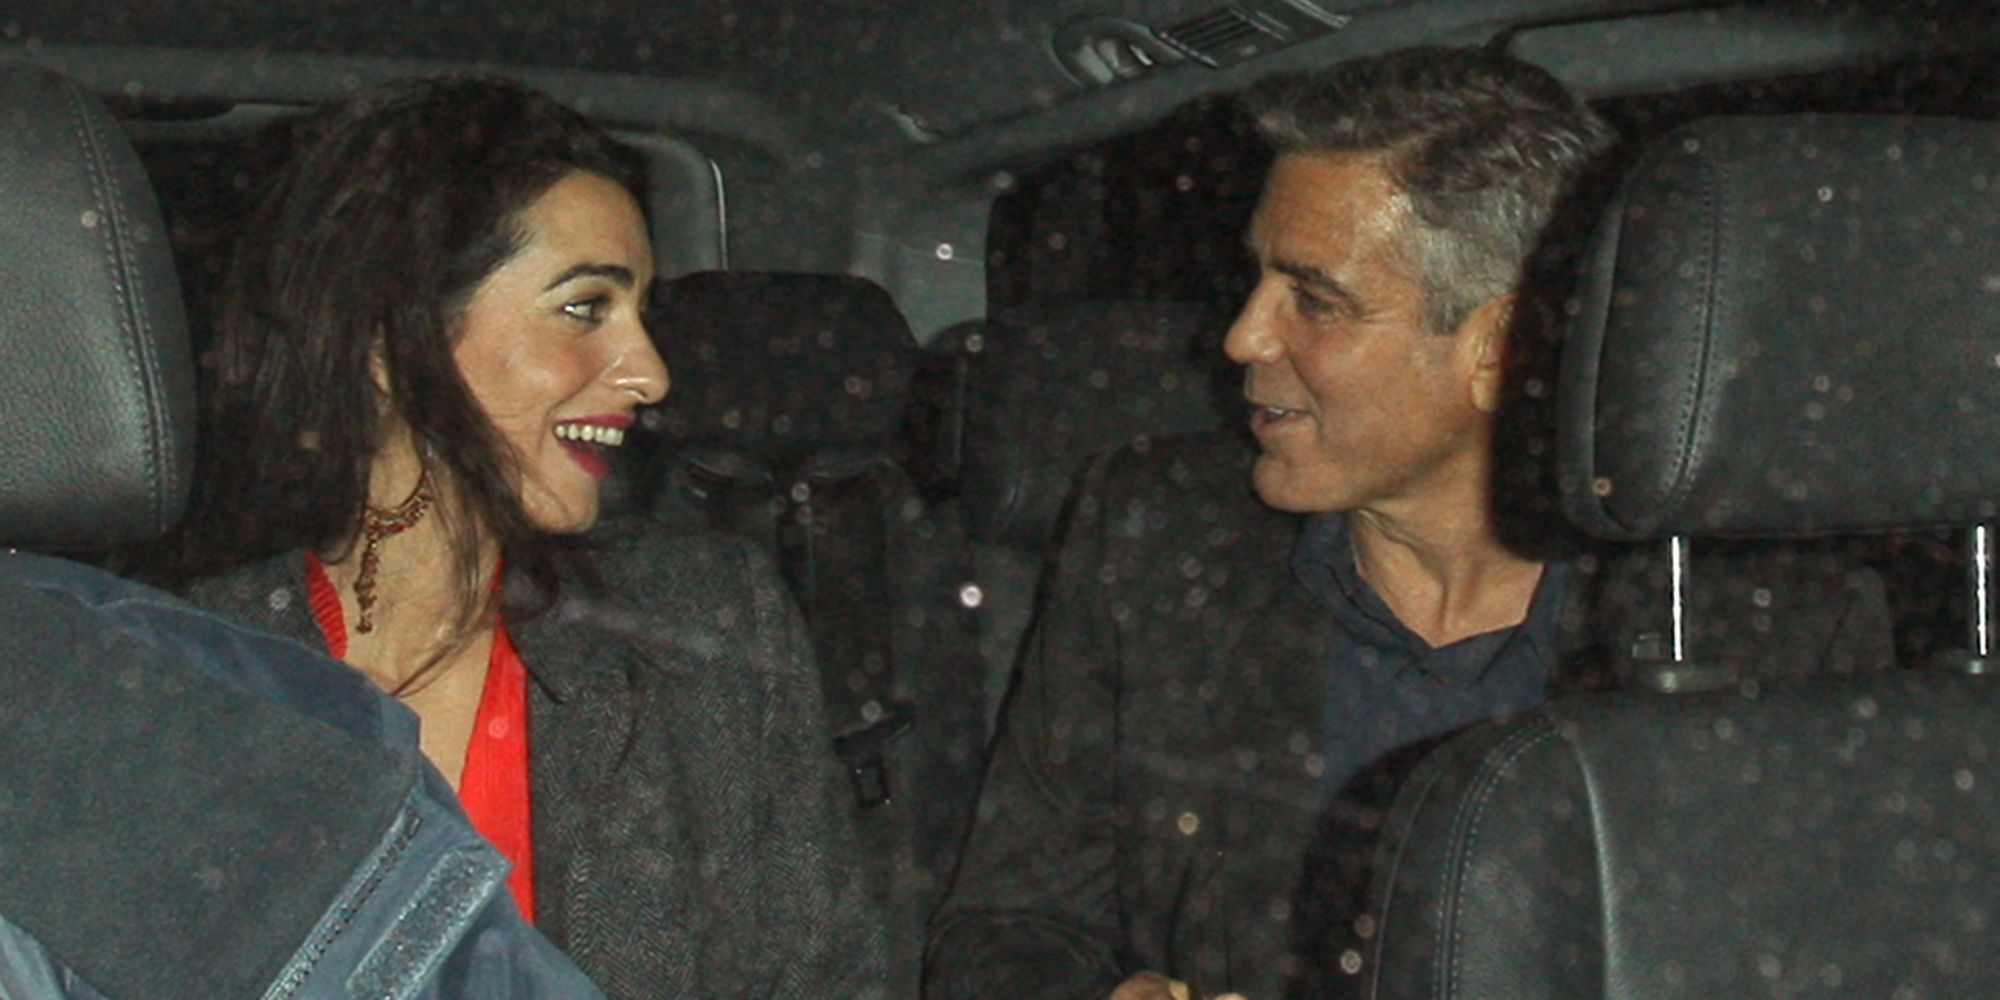 George Clooney Dating Amal Alamuddin? Actor Spotted With 